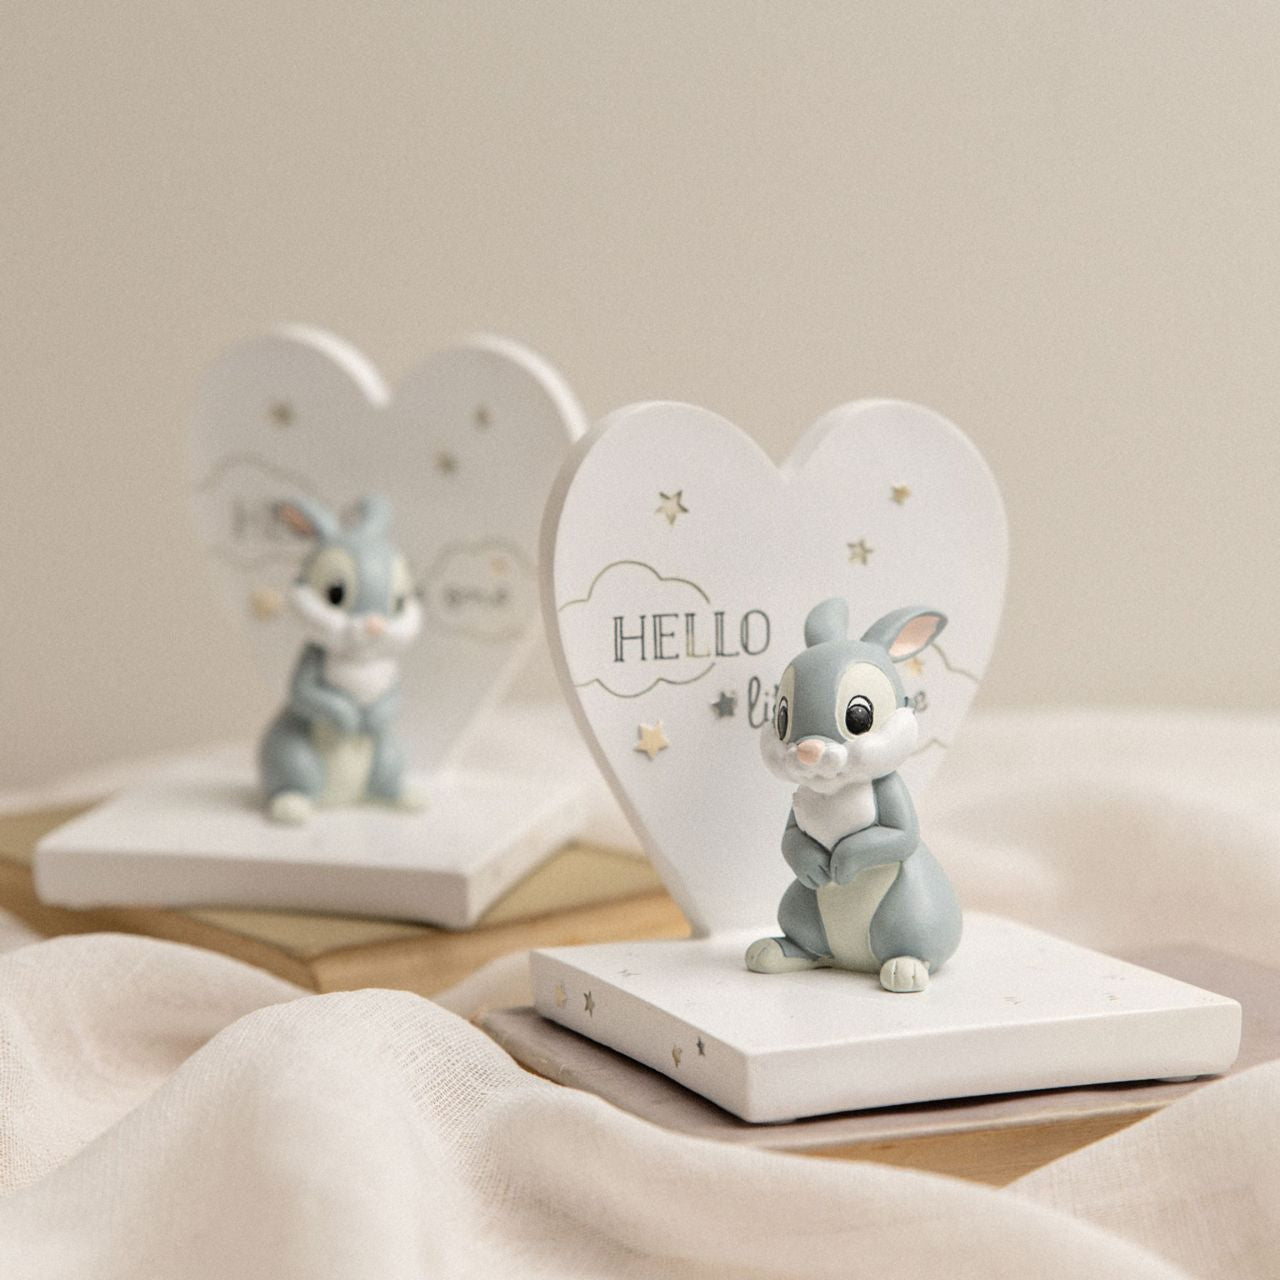 Disney Magical Beginnings 3D Bookends Thumper  A set of 3D Thumper bookends from DISNEY.  This enchanting pair of 3D Thumper bookends from Magical Beginnings brings timeless Disney magic to a child’s nursery or bedroom.